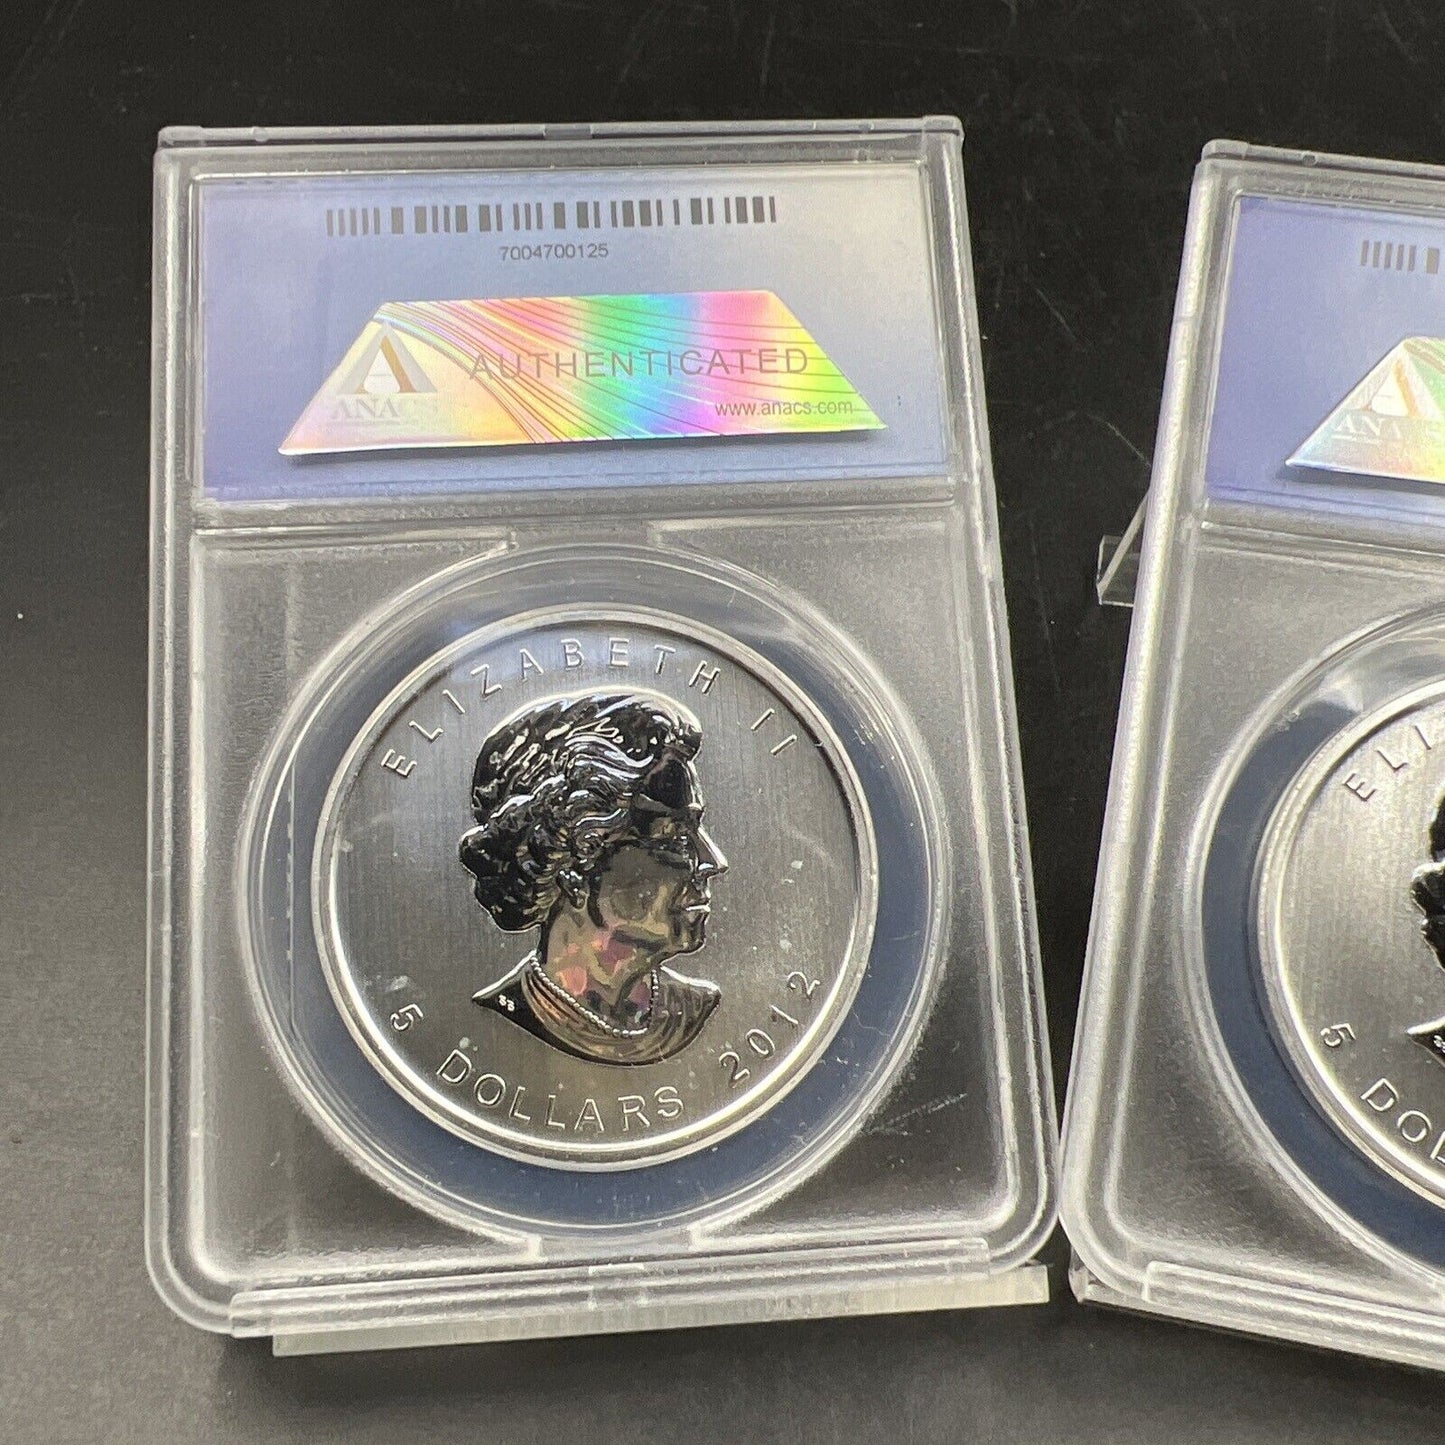 2 Consecutive Serial Number ANACS MS69 2012 1 Oz Silver Maple Leaf Privy